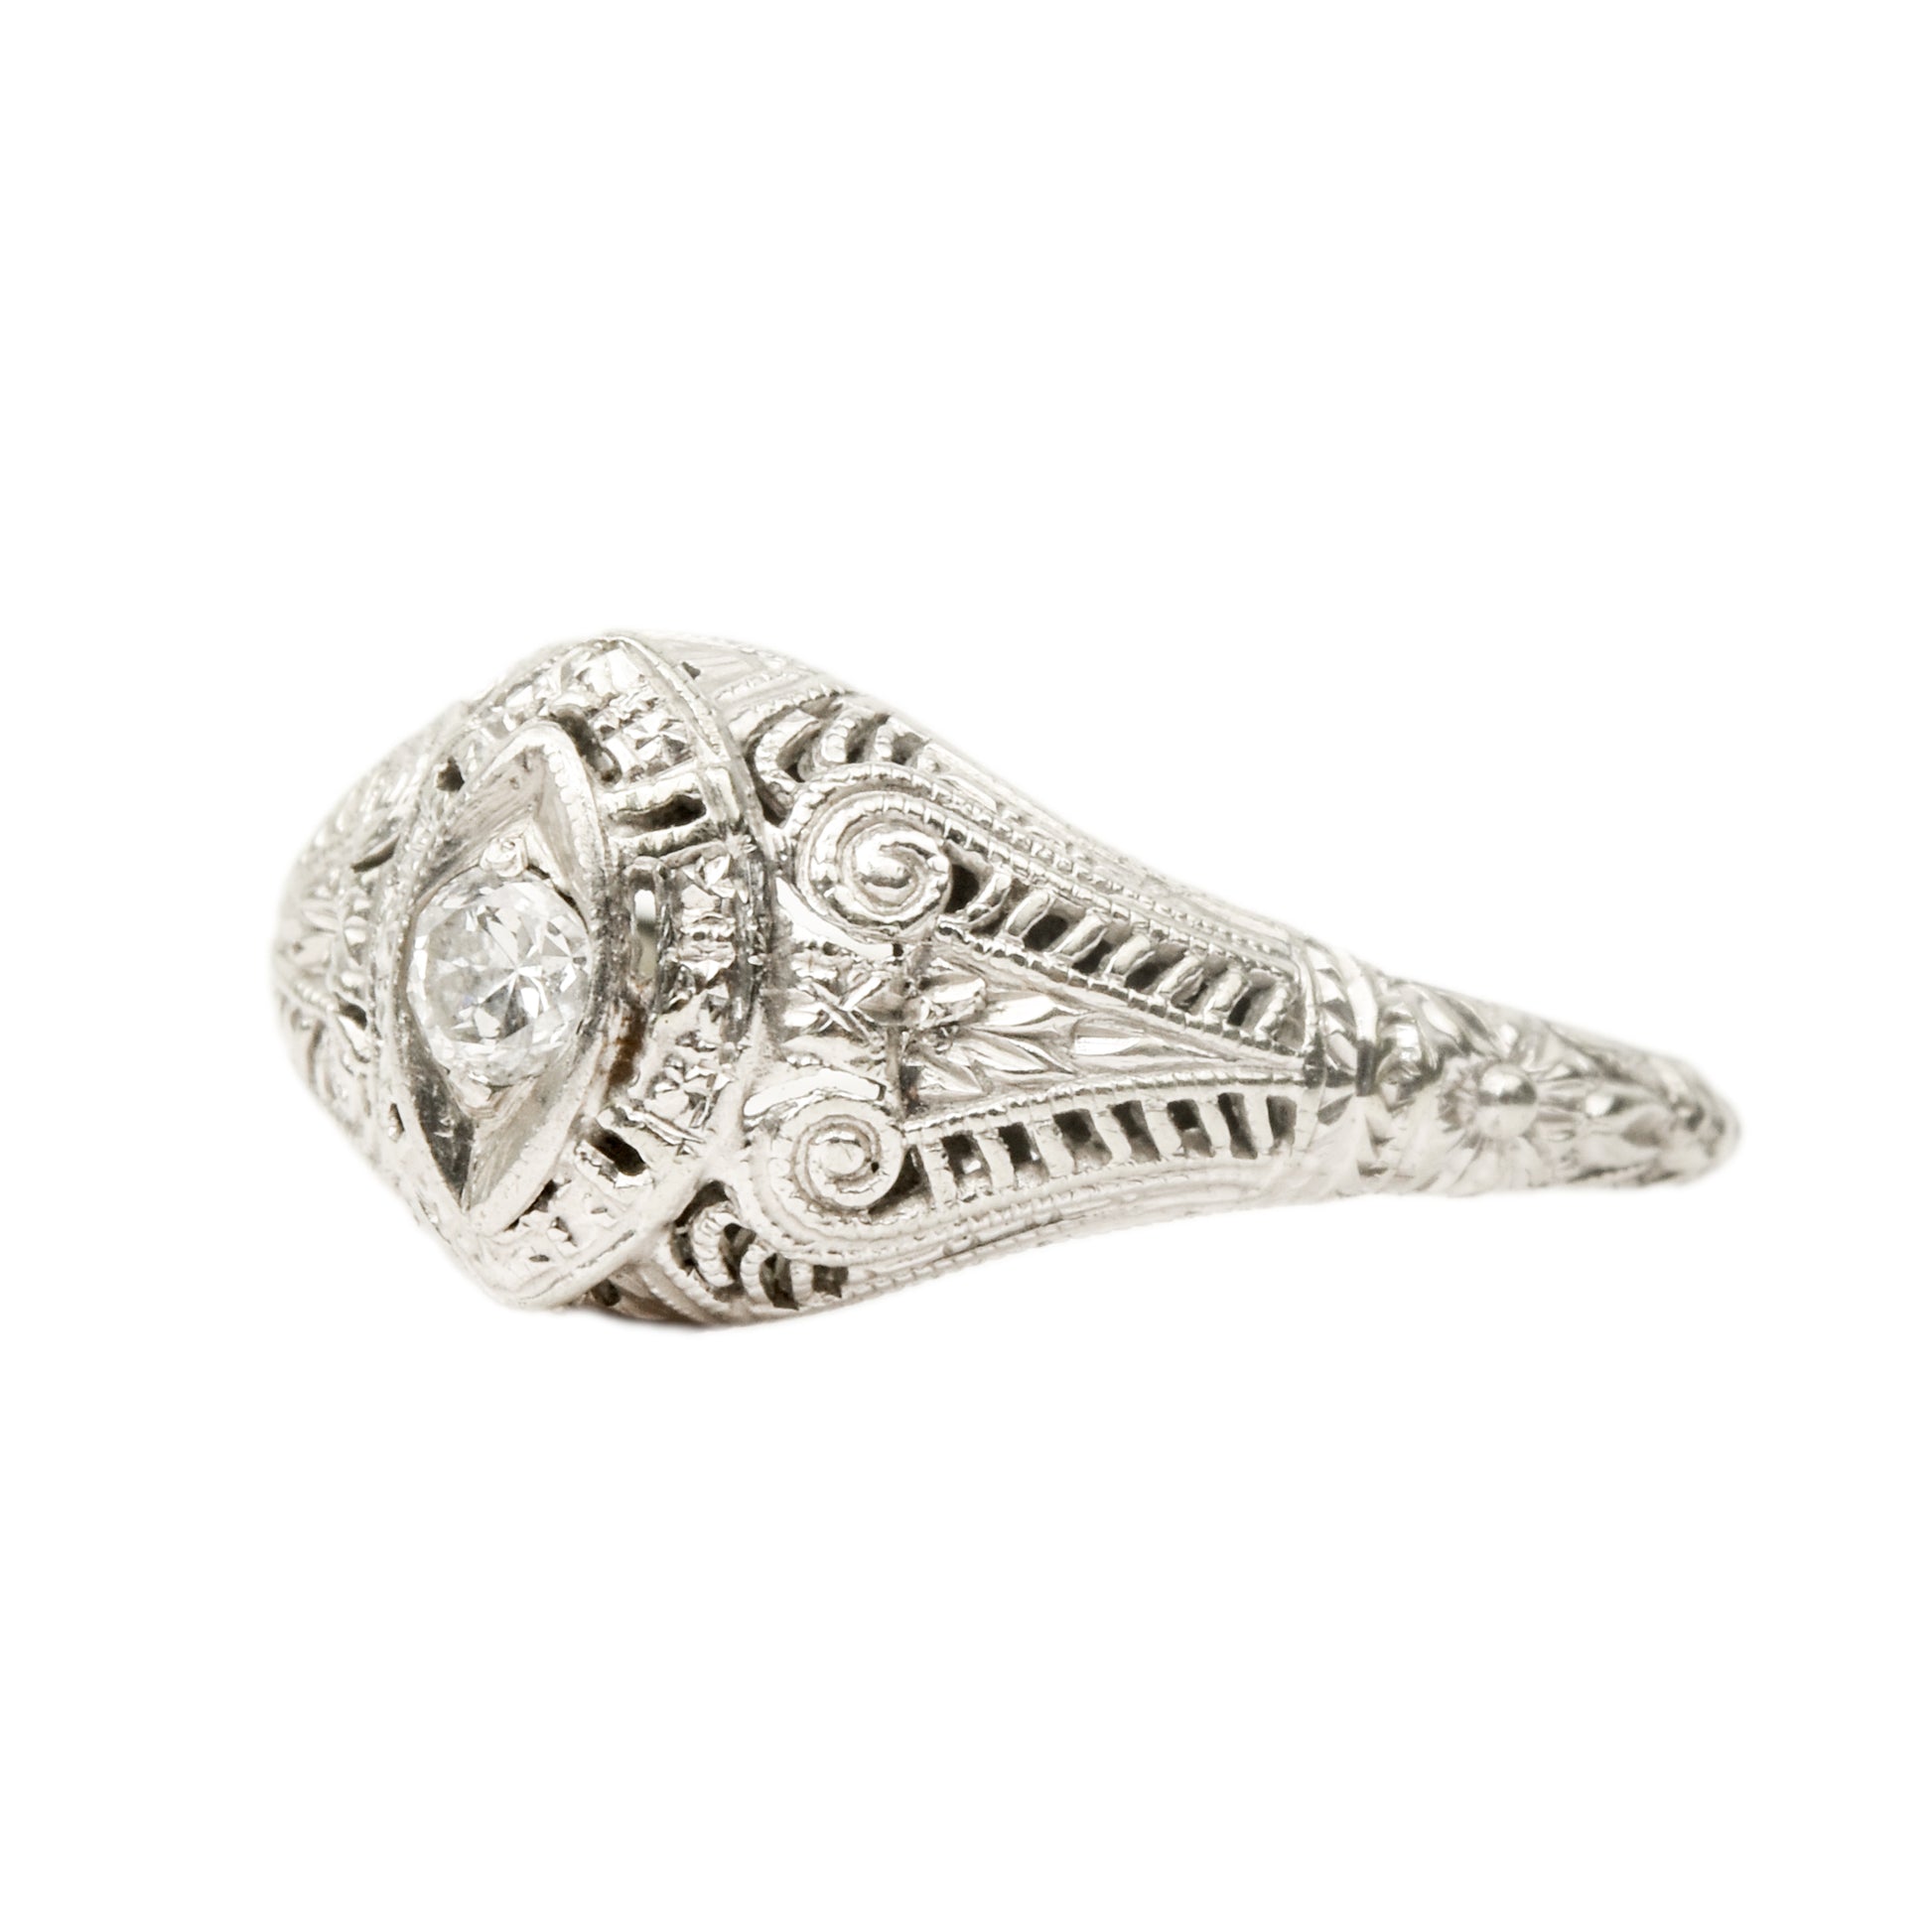 Art Deco 18K white gold filigree diamond solitaire ring featuring a 0.08 carat brilliant diamond, intricate metalwork, size 6.25 US, on a white background.